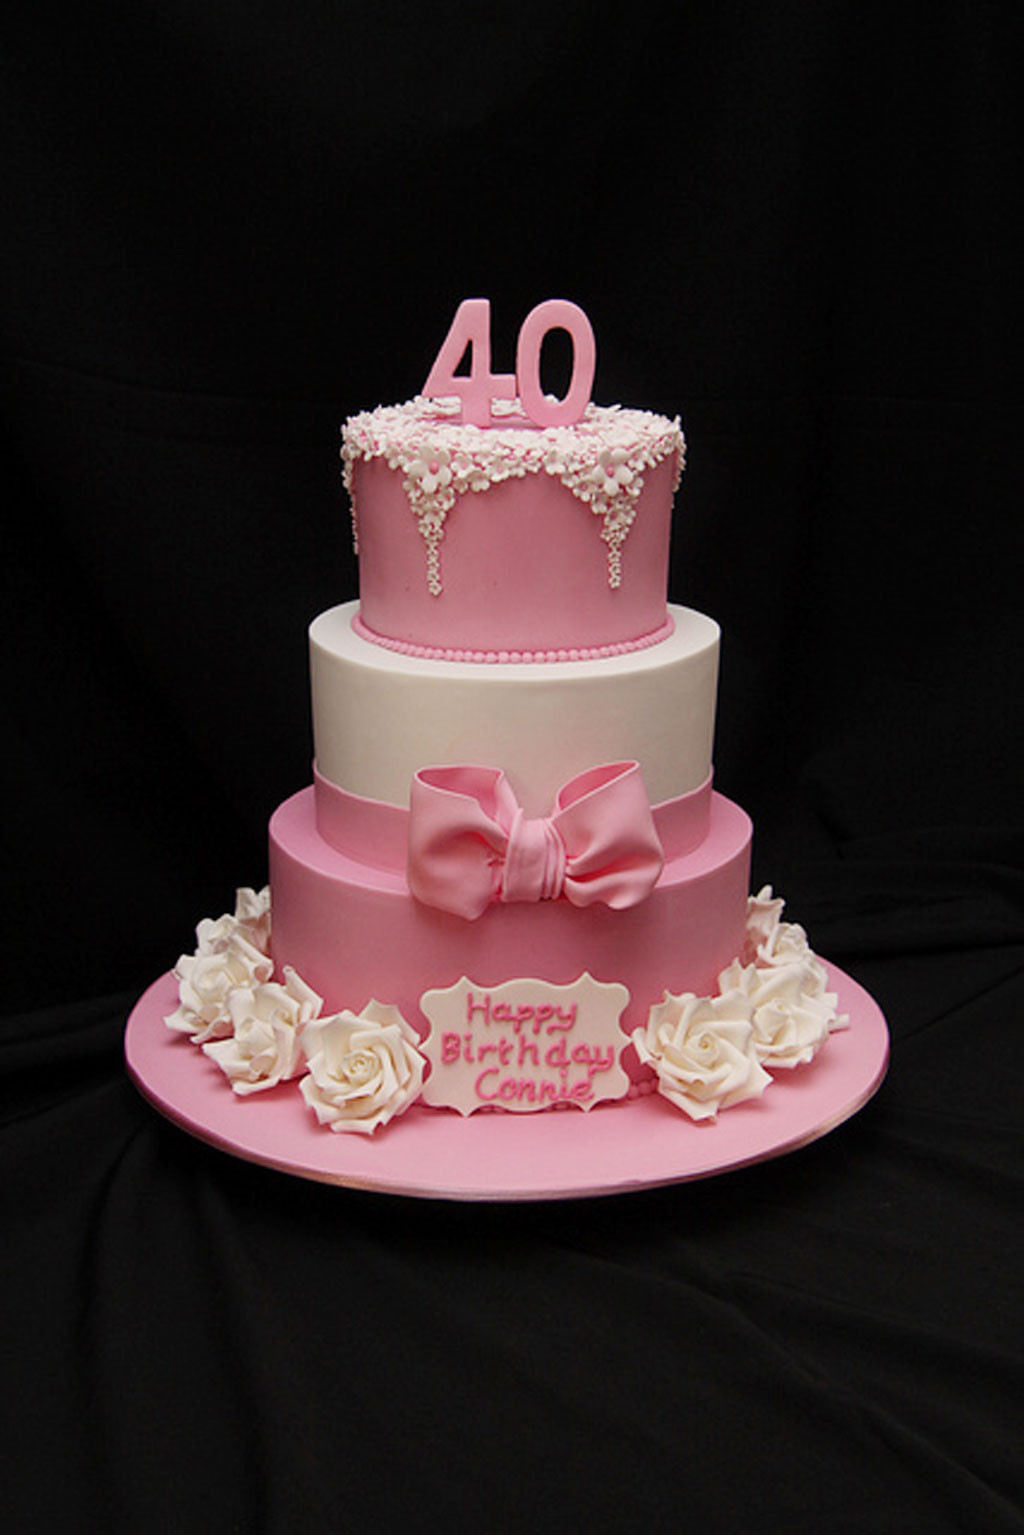 40th Birthday Cakes For Her
 40th Birthday Cakes Recipe Birthday Cake Cake Ideas by